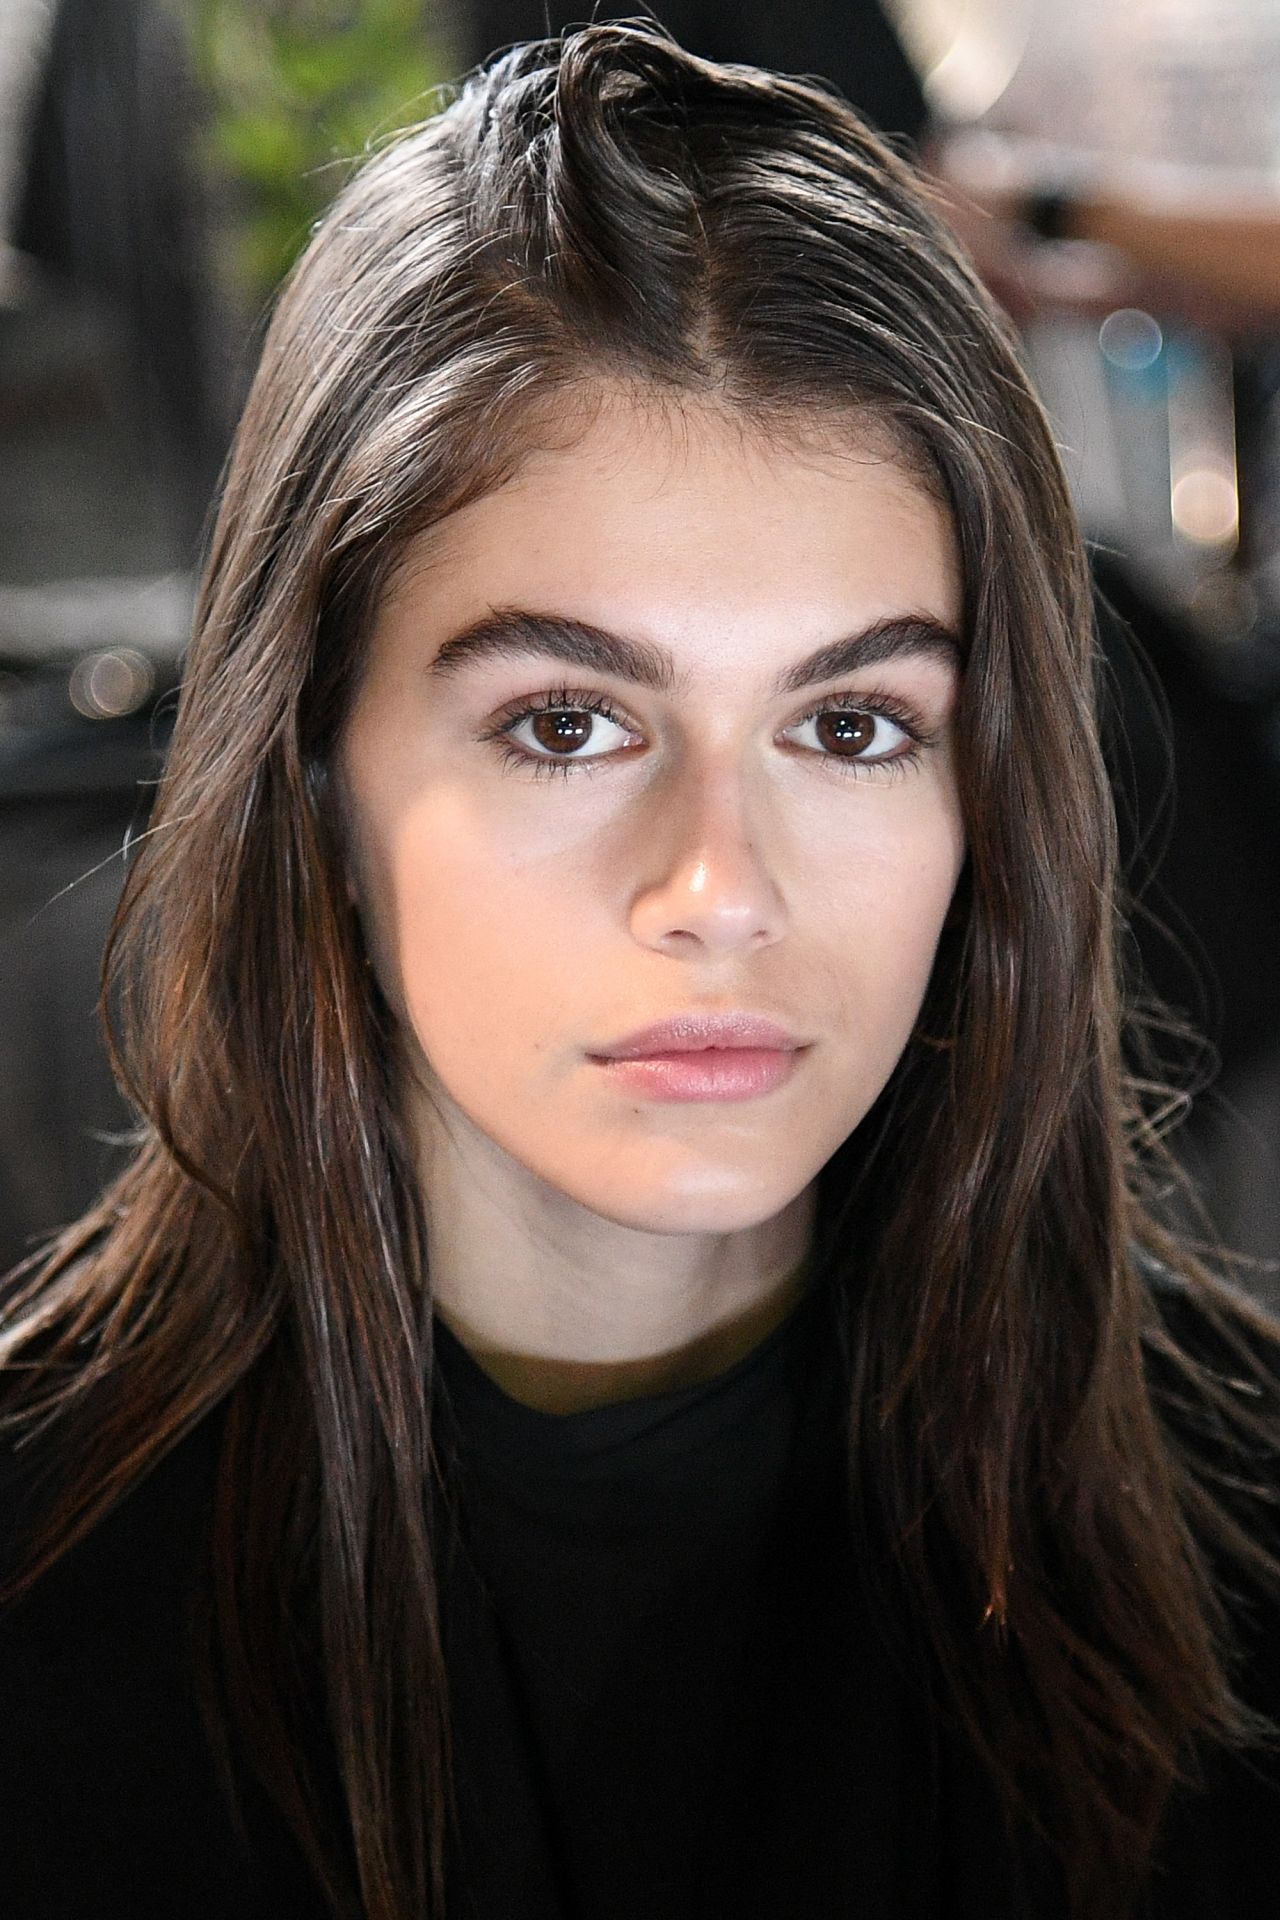 kaia-gerber-backstage-at-the-alexander-wang-june-2018-fashion-show-in-nyc-11.jpg